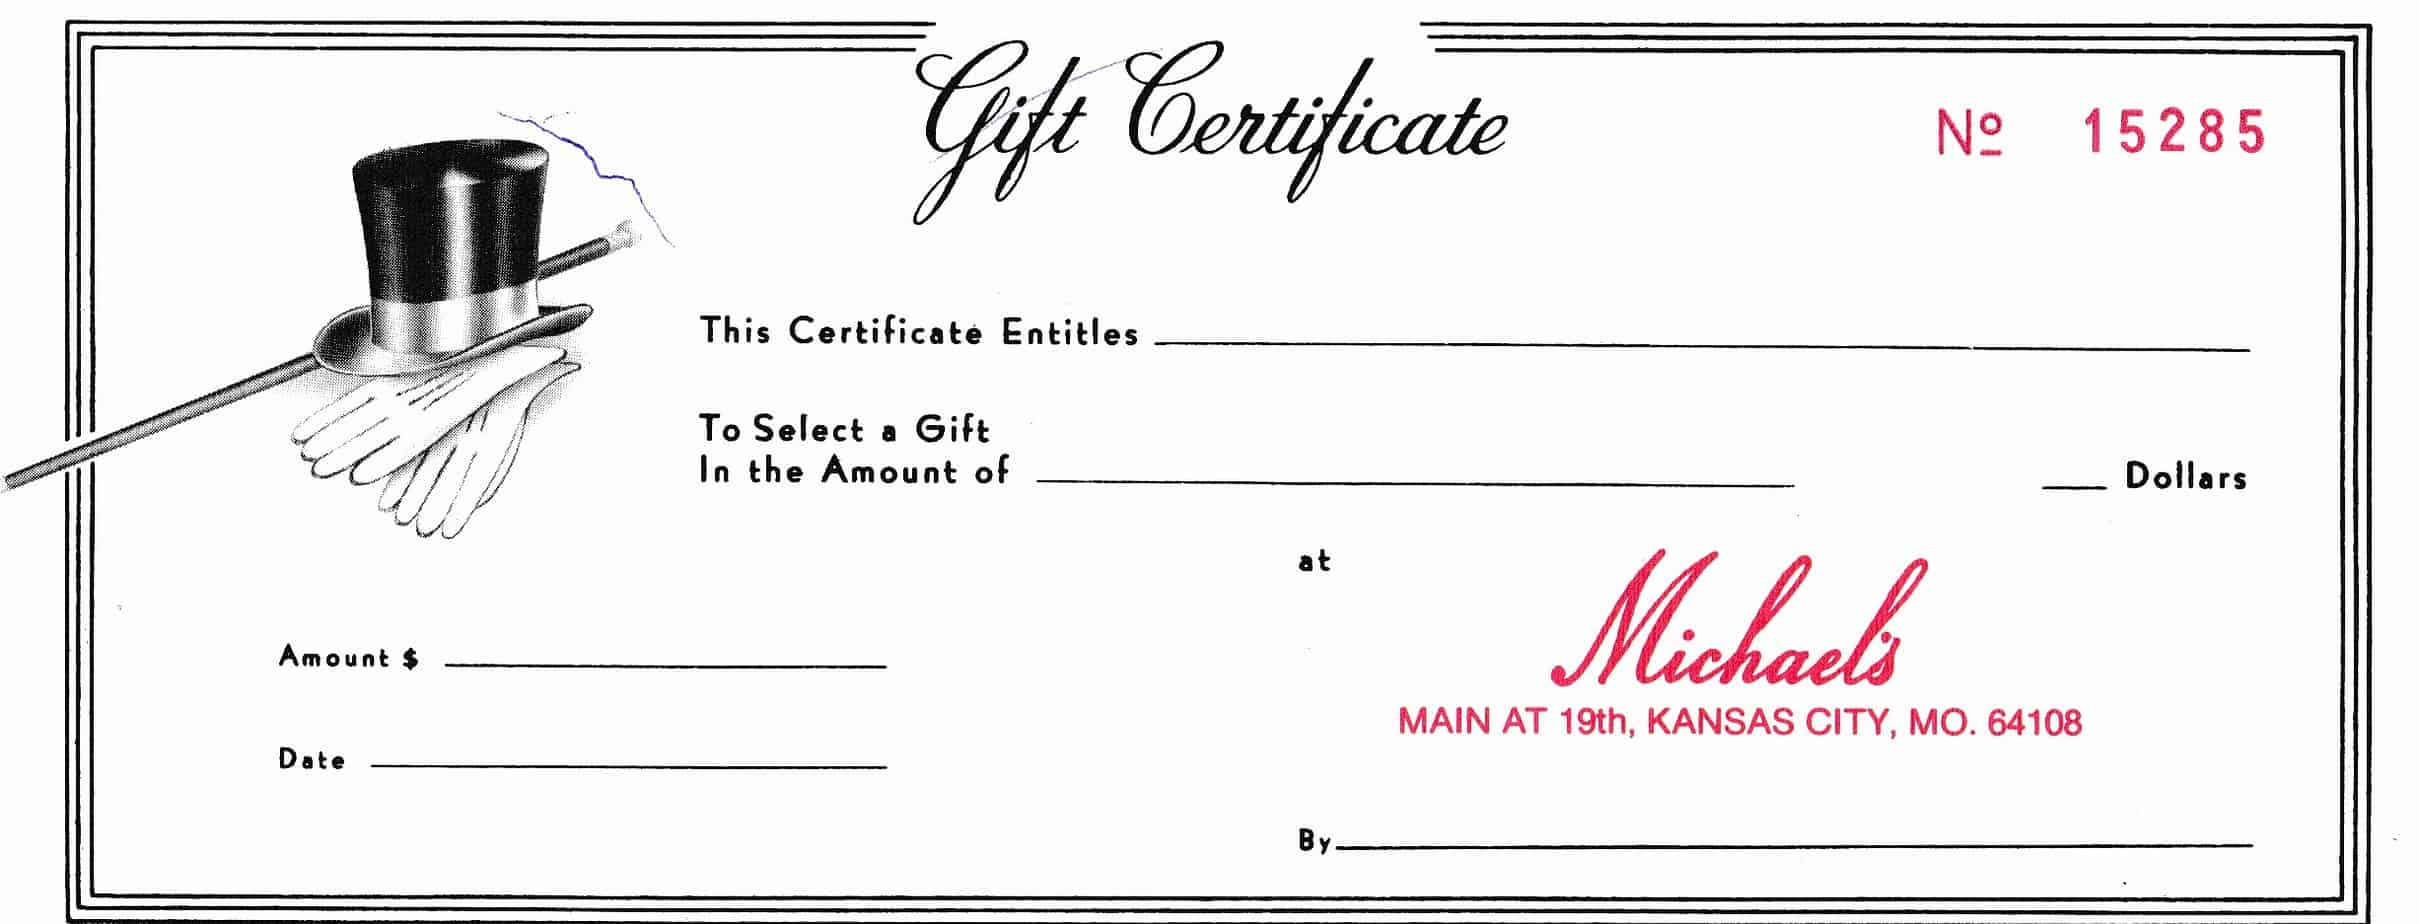 gift certificate free sample printable Templates Certificate Gift Formats Excel   PDF 18